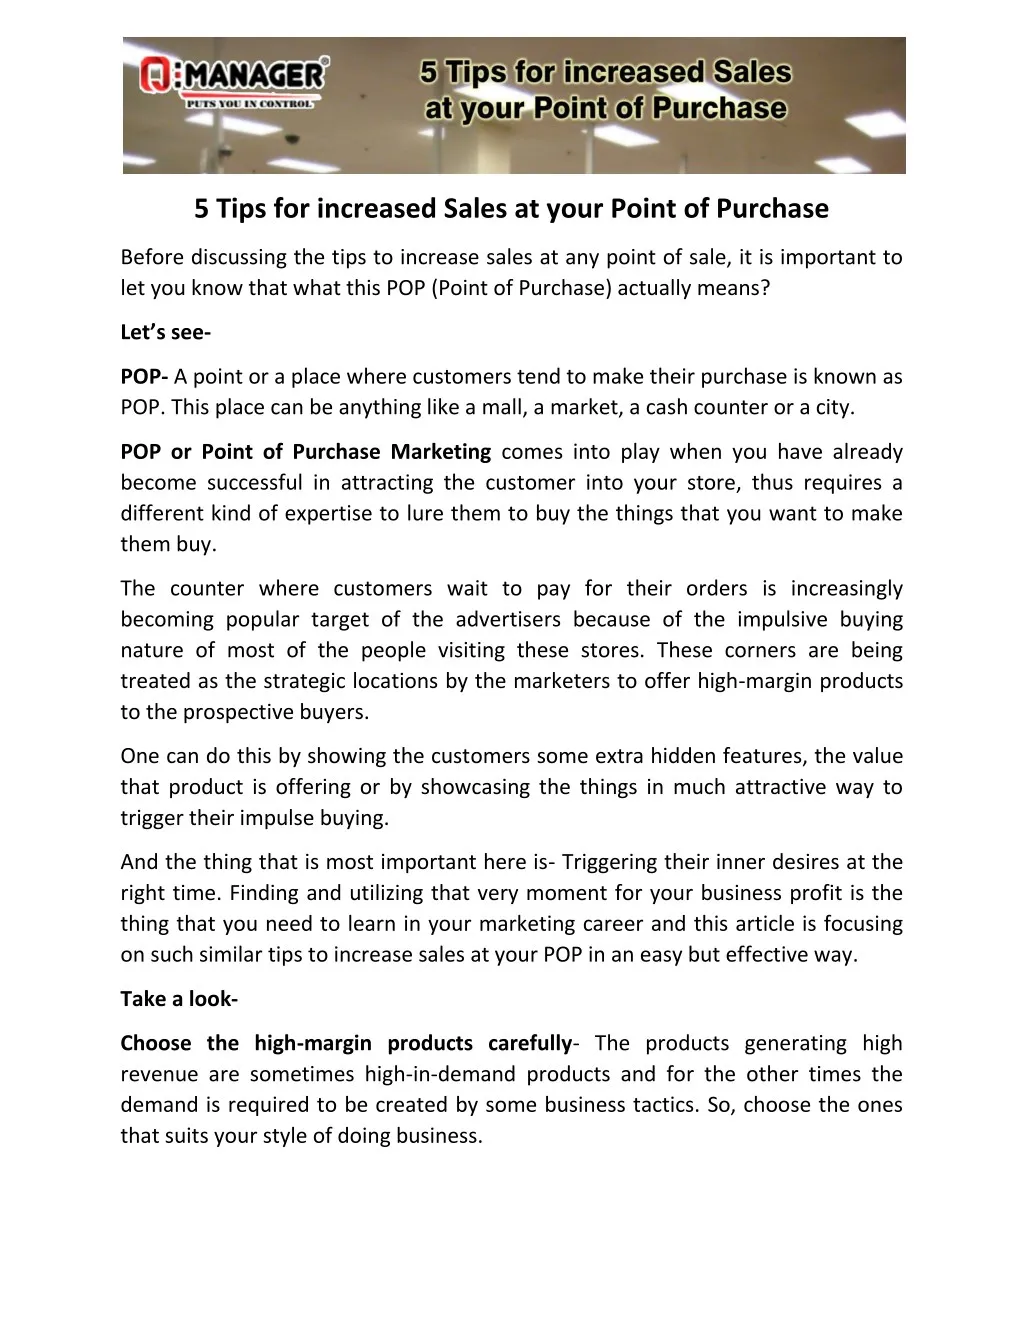 5 tips for increased sales at your point